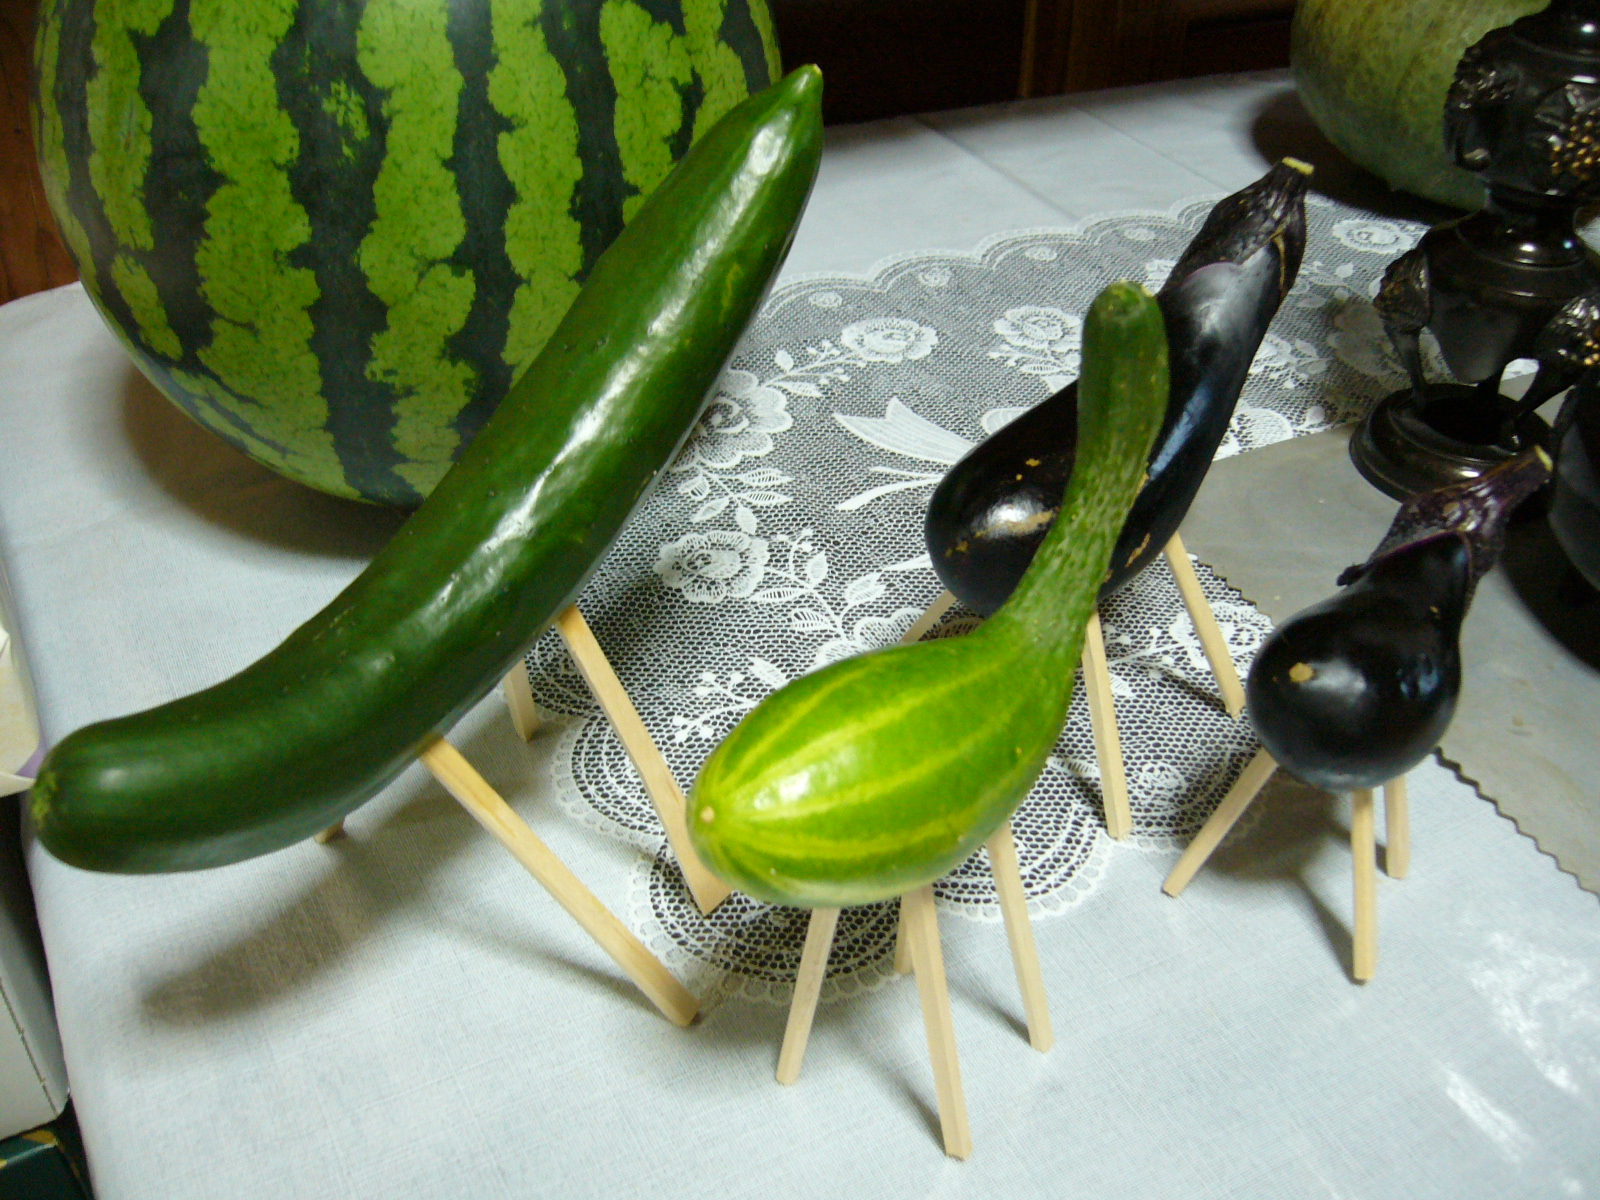 cucumbers and eggplants with chopsticks in them so their ancestors can get home from the spirit world.